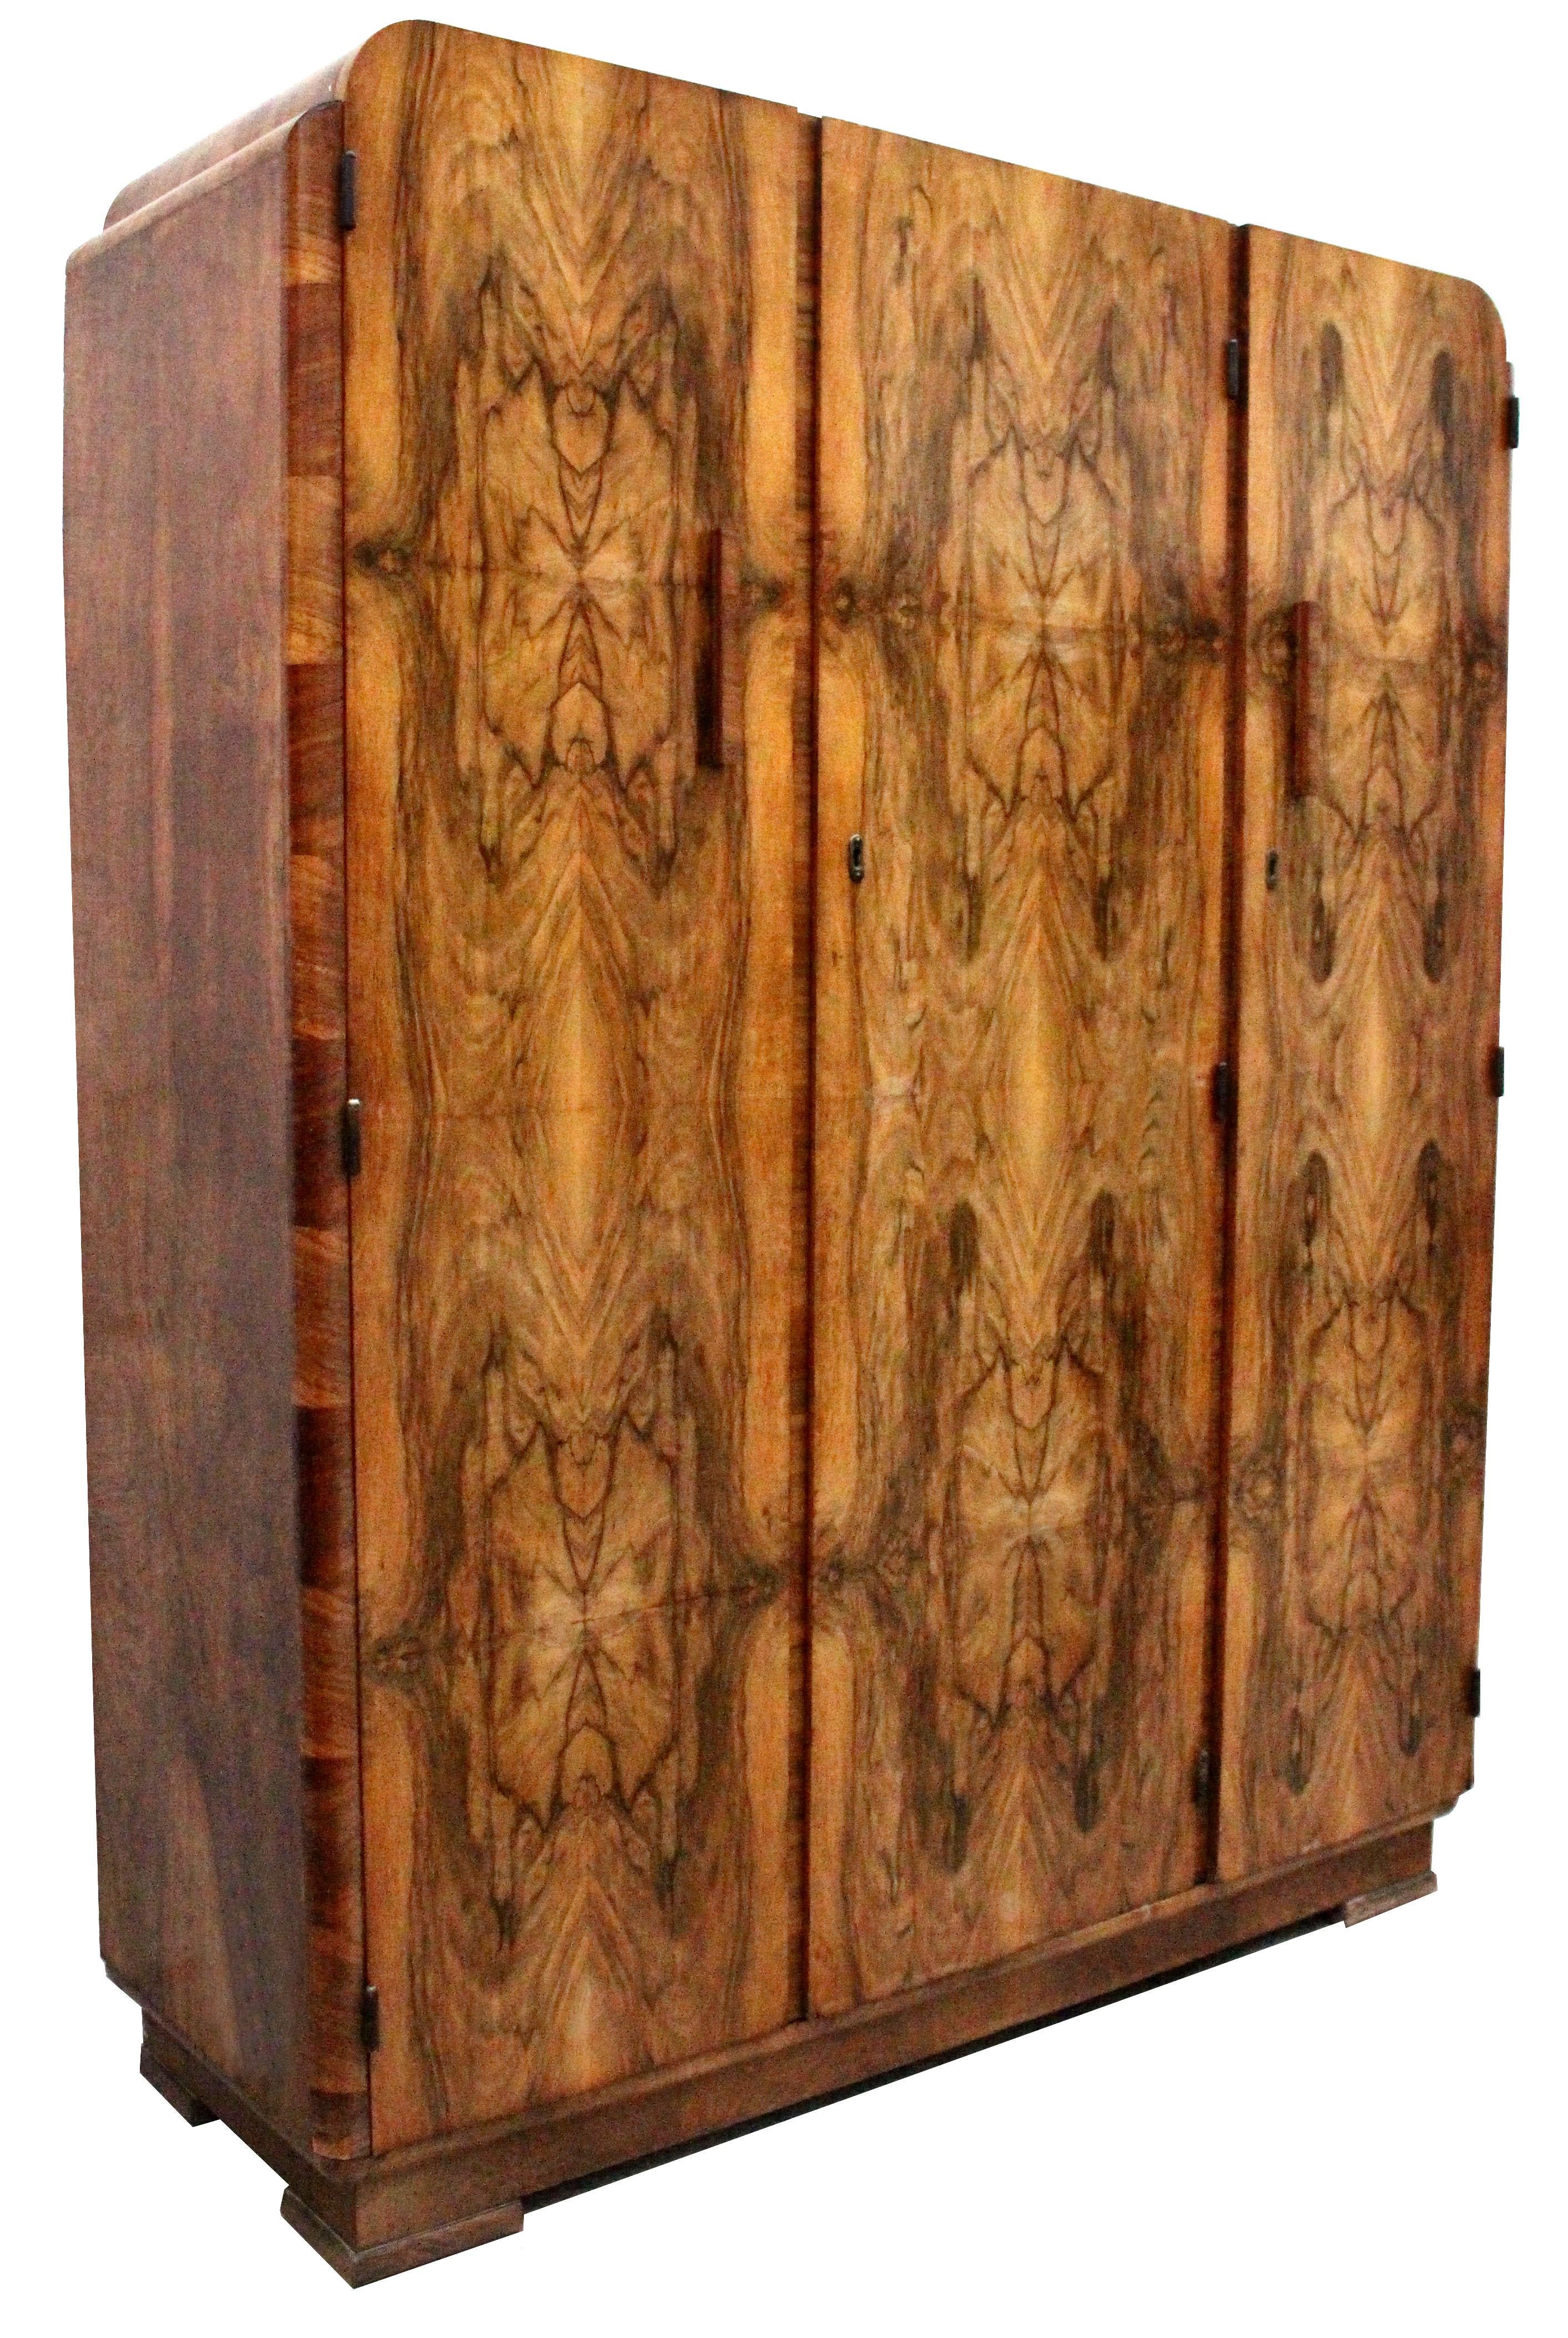 If you're looking for something spectacular for your bedroom without compromising quality and functionality then this Original Art Deco triple wardrobe might just be for you. We also have the matching double to this piece, please see our other